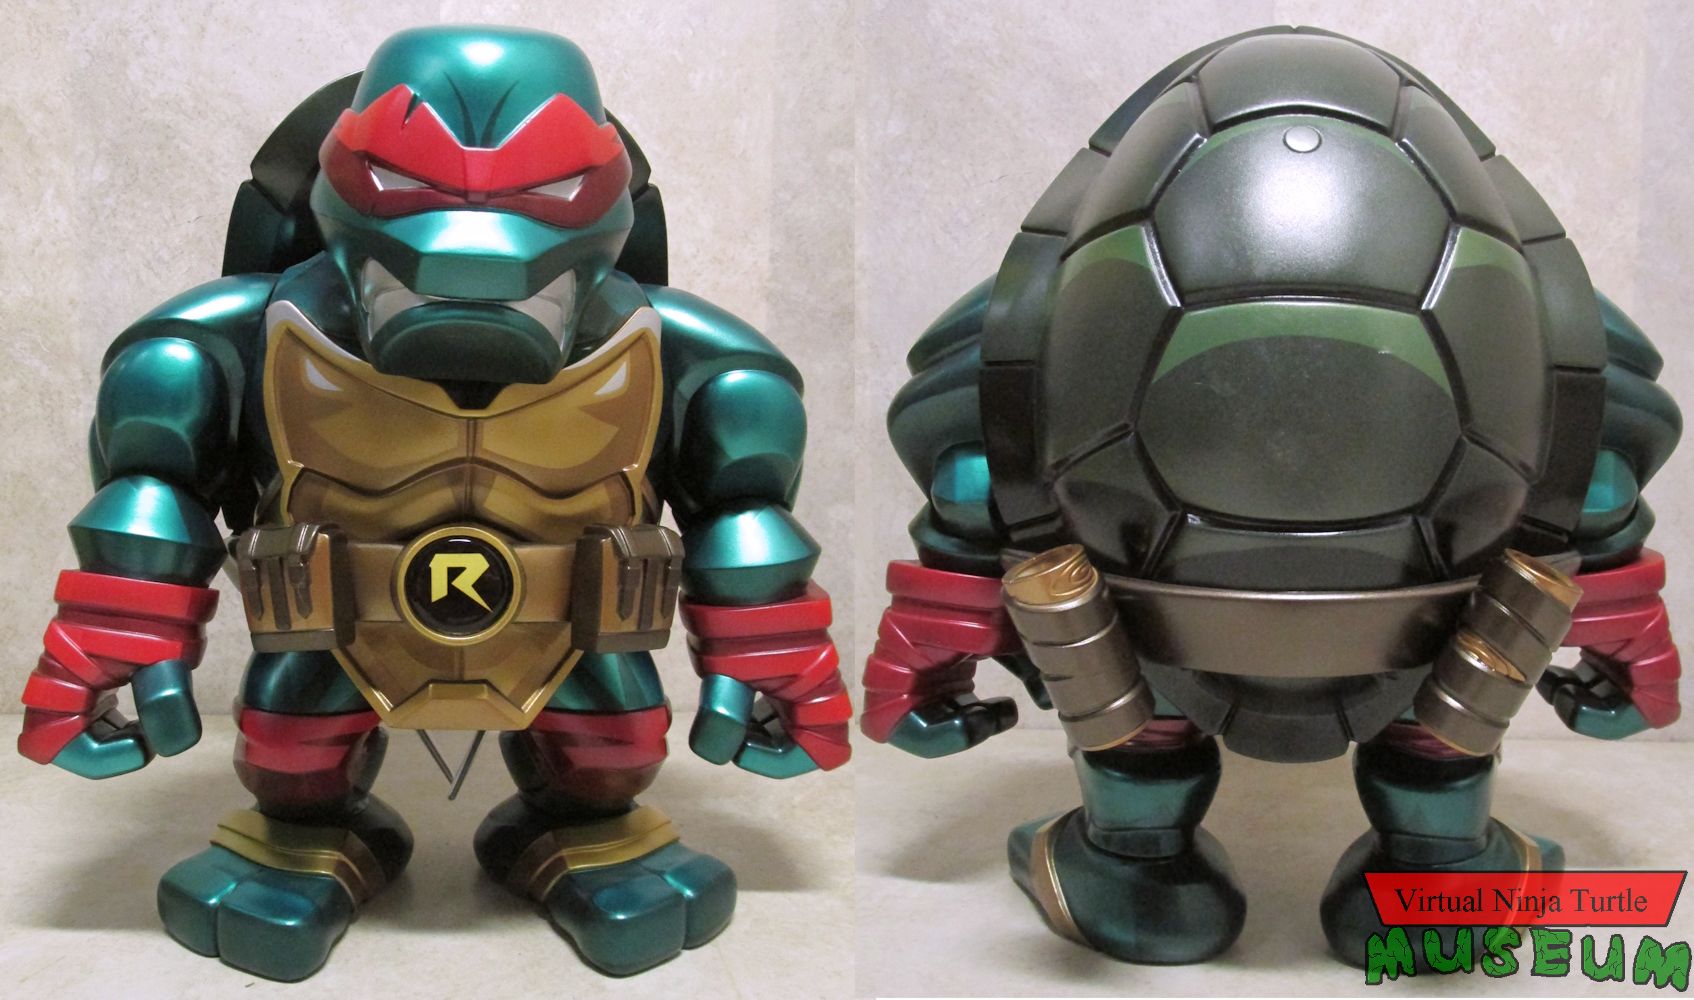 Metallic Edition Raphael front and back